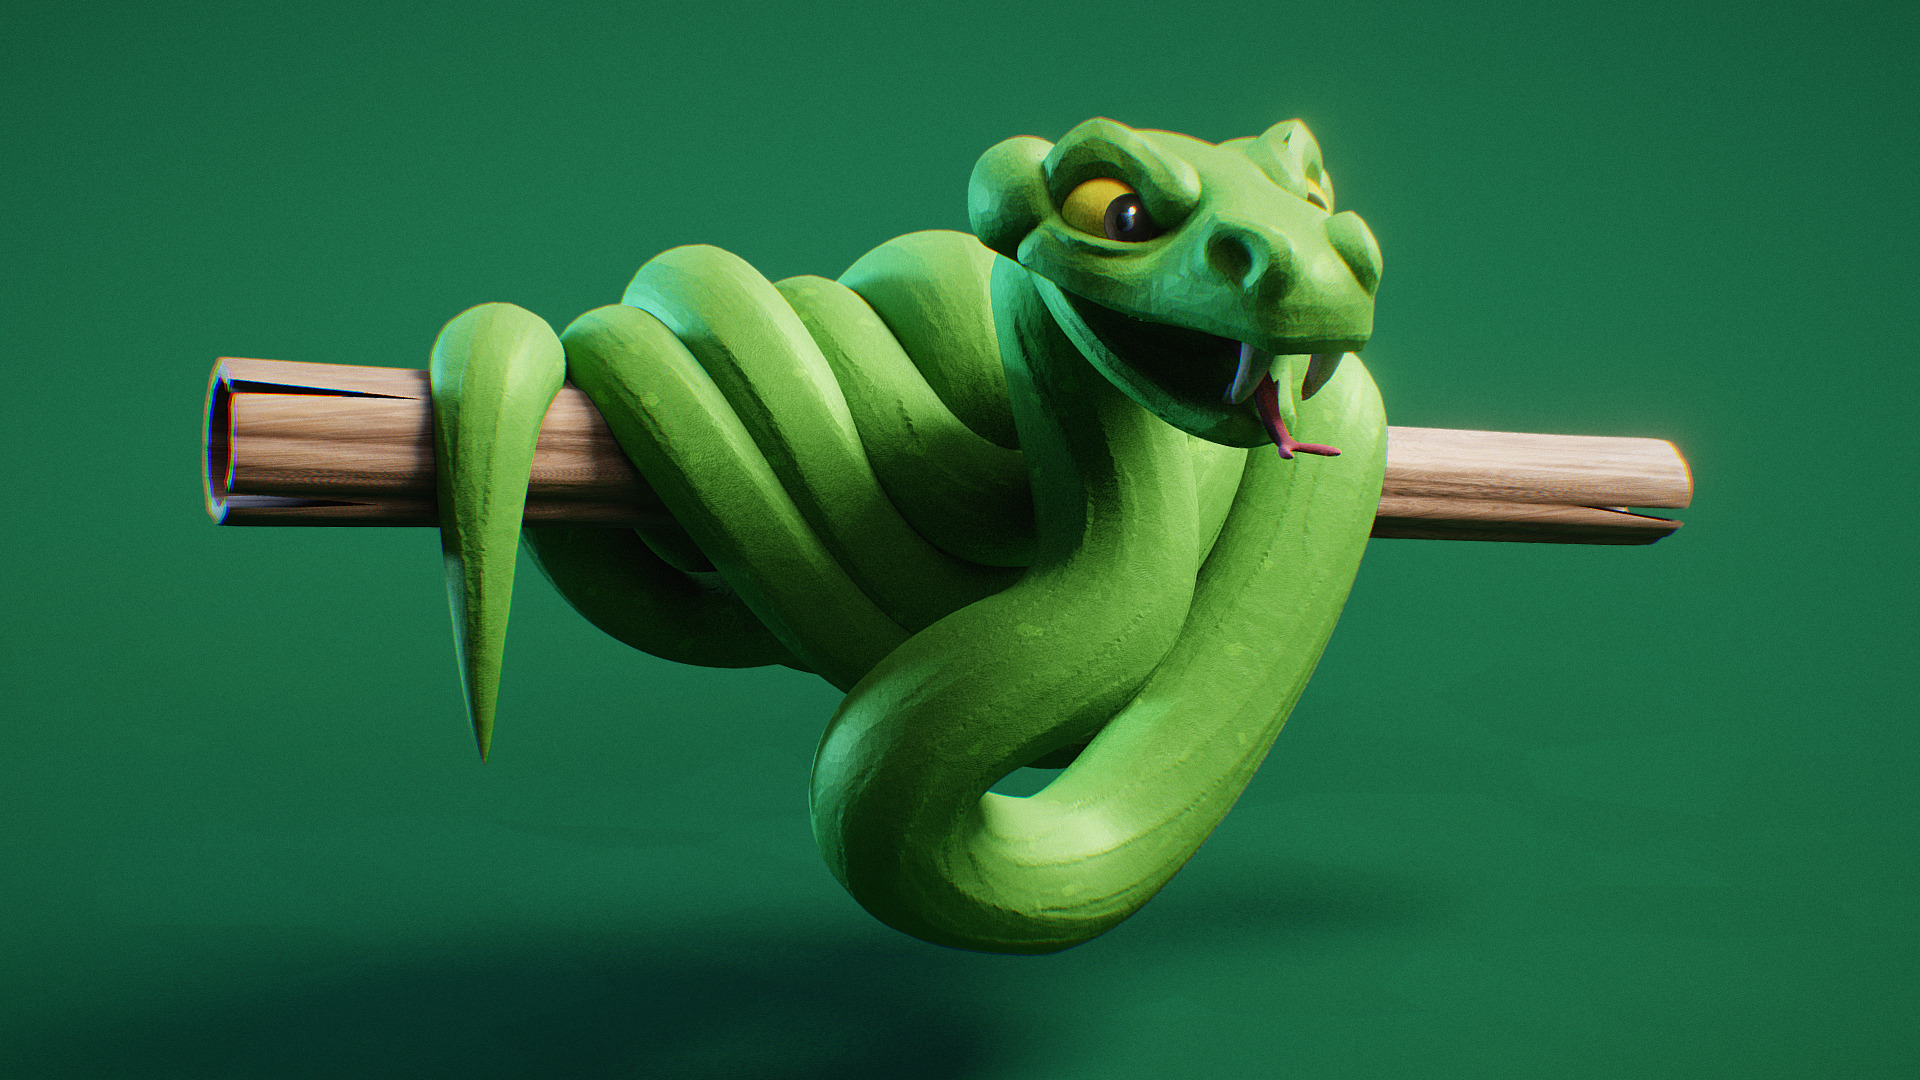 3D model Day 22 – Beast : Jungle - This is a 3D model of the Day 22 - Beast : Jungle. The 3D model is about a green frog on a branch.